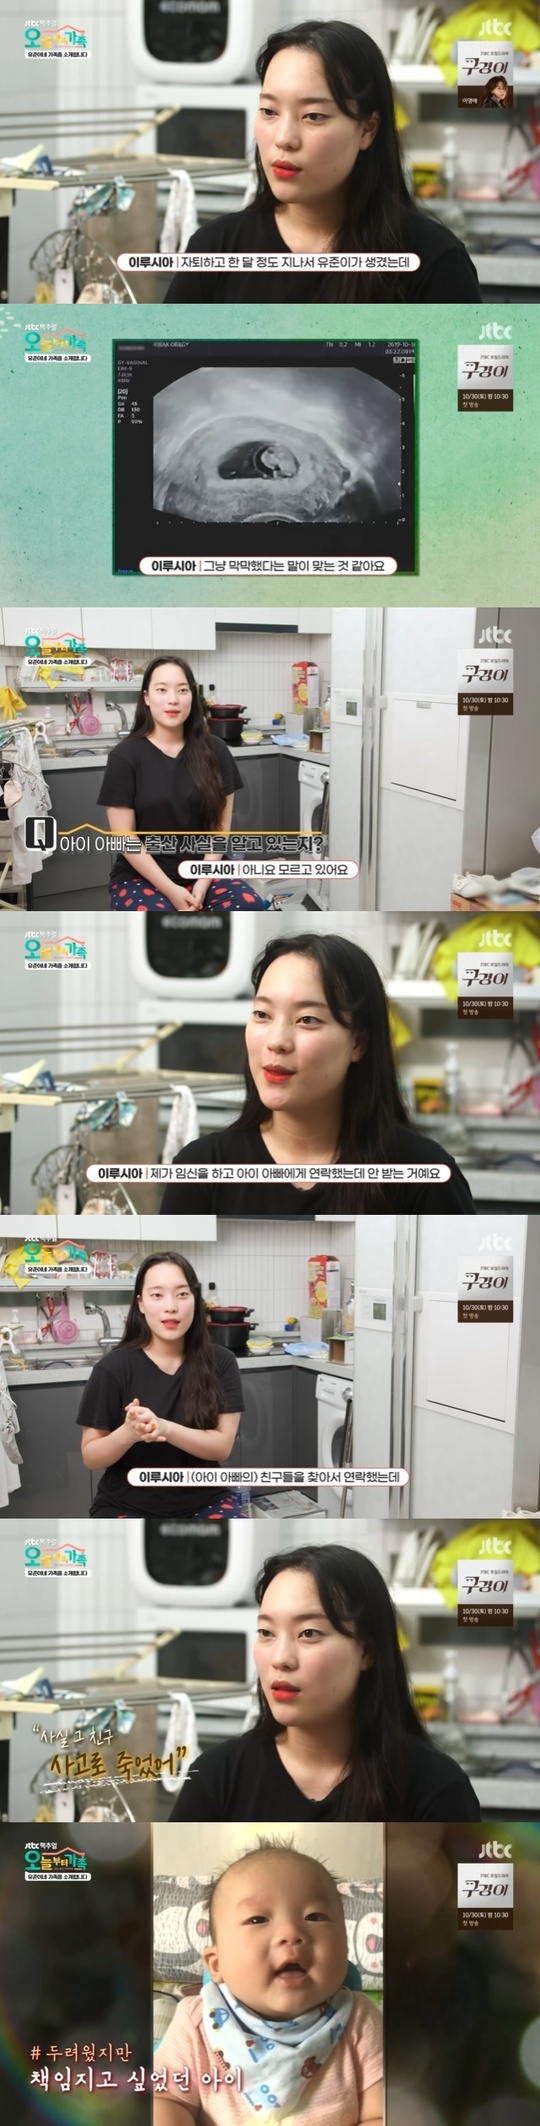 For Keeps Irucia, 20, told the story of what had to be For Keeps.JTBC FACTUAL - Family from today, which was first broadcast on October 23, appeared in the first episode of the JTBC current affairs program, 20-year-old Irucia and Lee Yu-joon, who co-parented with Kim Jae-woo and Cho Yu-ri.Irucia, who is a 15-month-old son at a young age of 20, said, I was pregnant in September at the age of 18. When Yu Jun first appeared, I was a student.At that time, I thought that I should play I have to play so strong that I dropped out because I thought it would be better to concentrate on what I do.I dropped out and was embarrassed to have Yu Jun after about a month. Irucia said at the time that she was so unfavorable, I was 18 years old at the time, so there was not much I could do myself.Asked if she knew about the birth of her child, Irucia said: I dont know. I got pregnant and contacted Father, but hes not answering.I contacted Friend of the child Father, but I was hesitant and said, In fact, the friend died because of the accident.At present, Irucia was living with a house full of various living expenses and 800,000 won in basic living expenses. Irucia said, I can tolerate all the sickness, crying and bitterness of the child.It is hard to be honest. When a child is sick, I have a high fever and I have to go to the hospital right now, because I do not have a car or a license, so it is too uncomfortable to move. 